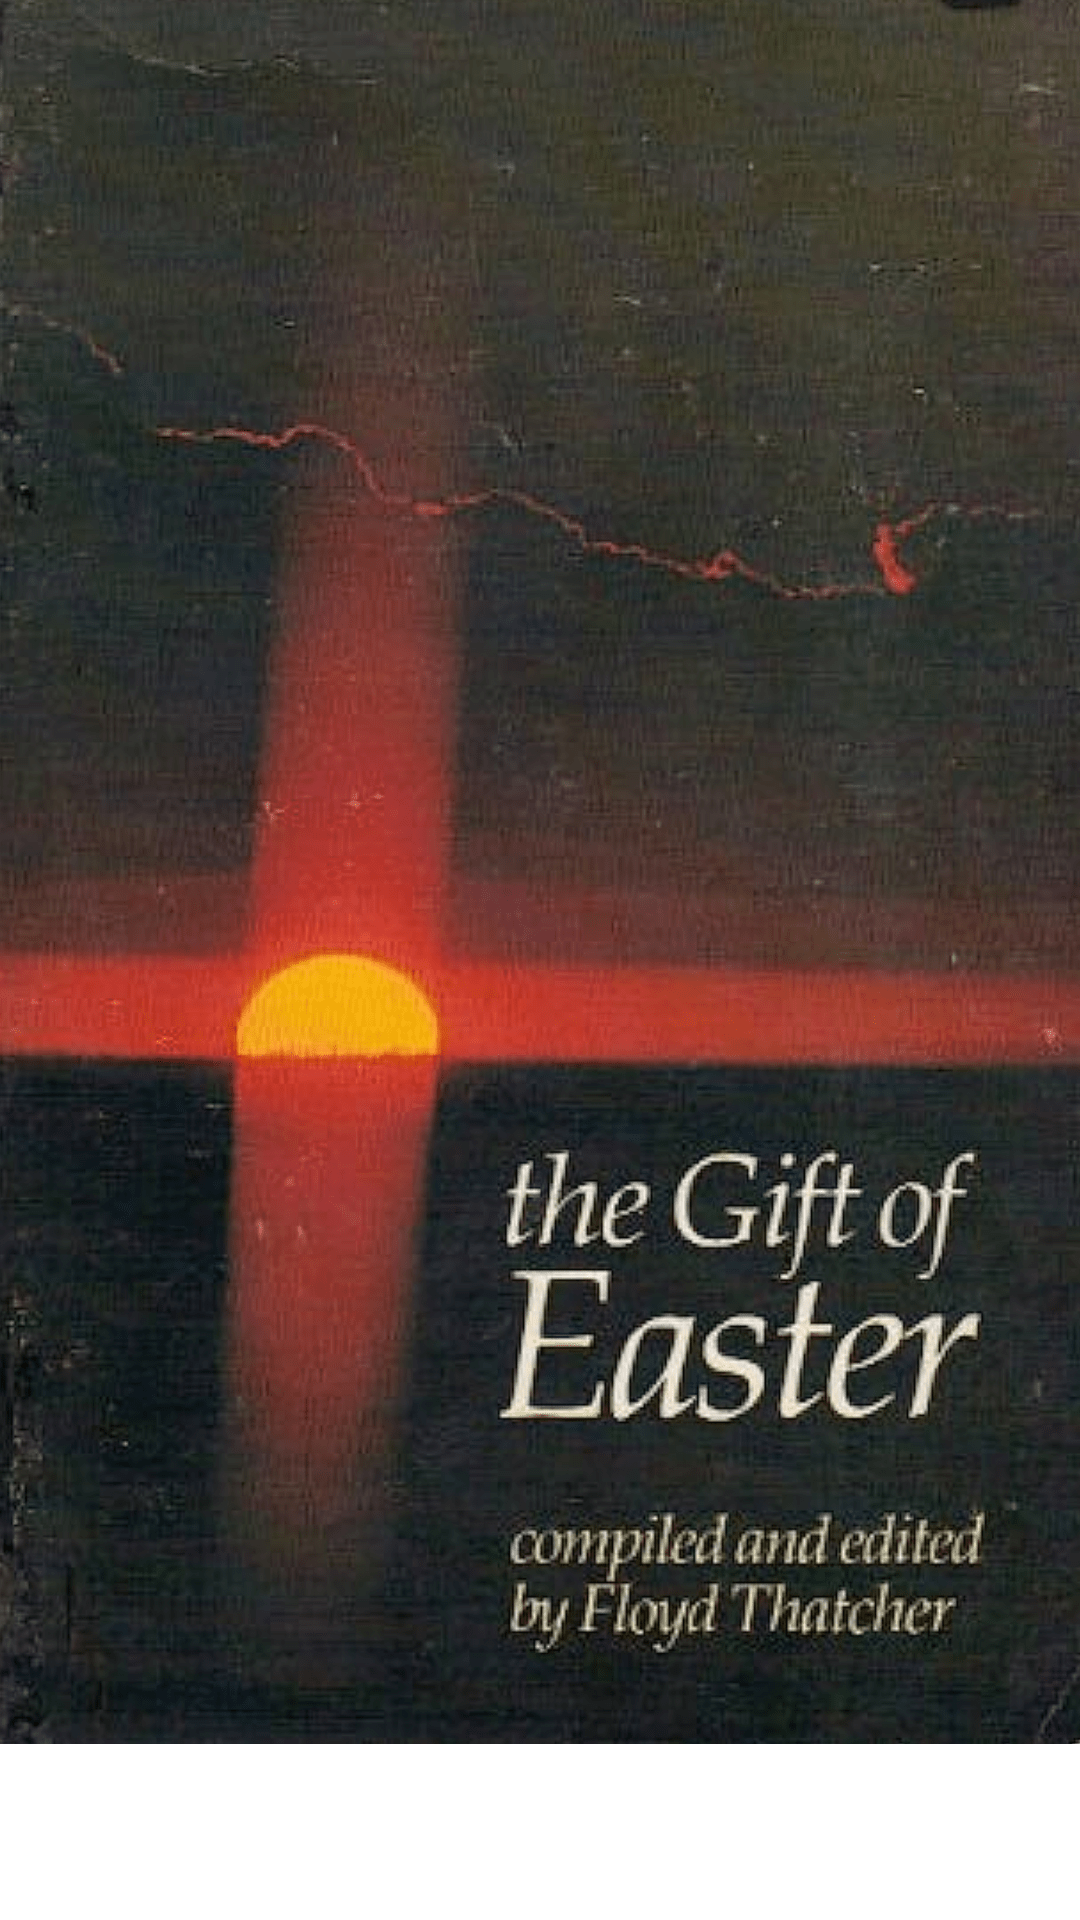 The Gift of Easter by Floyd Thatcher